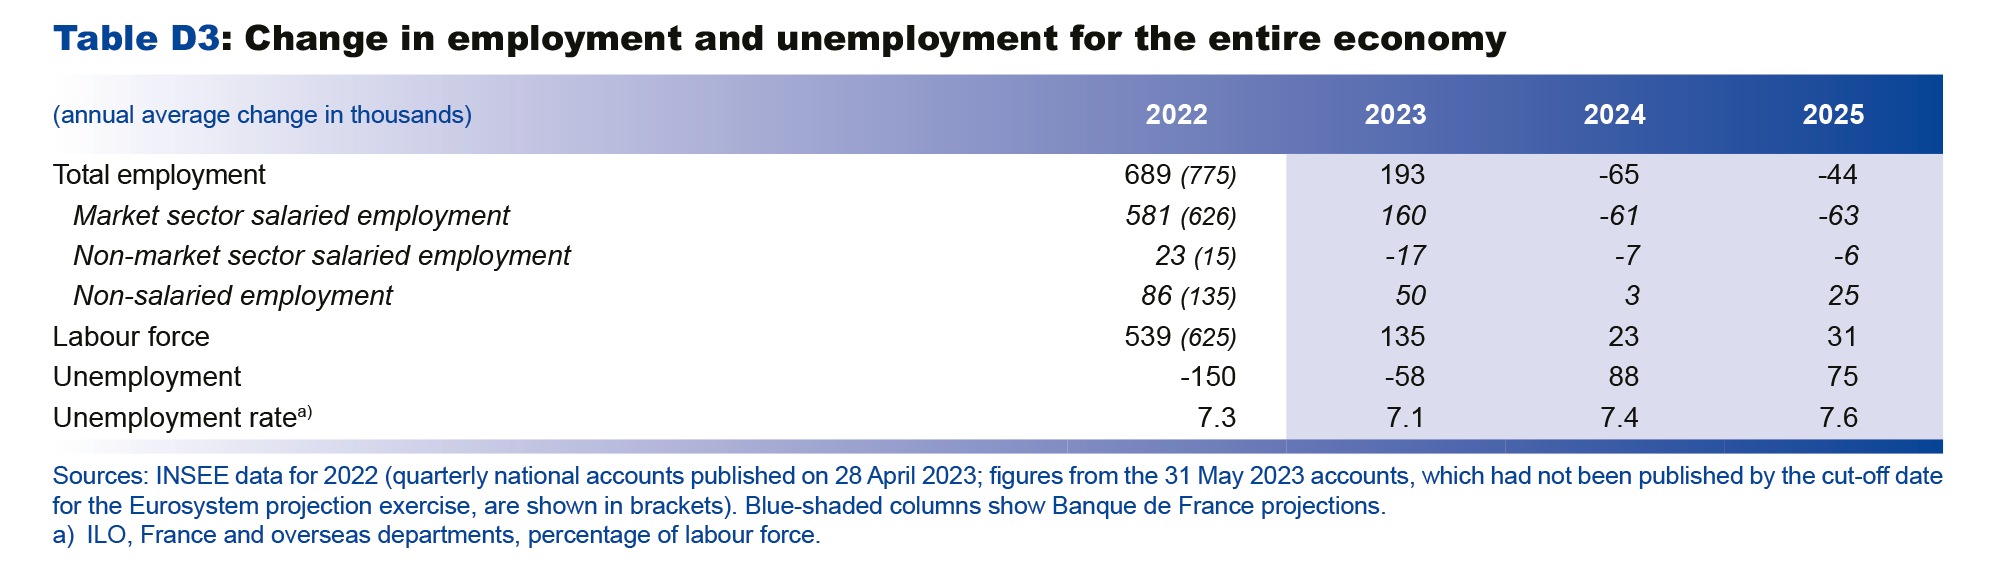 Change in employment and employment for the entire economy